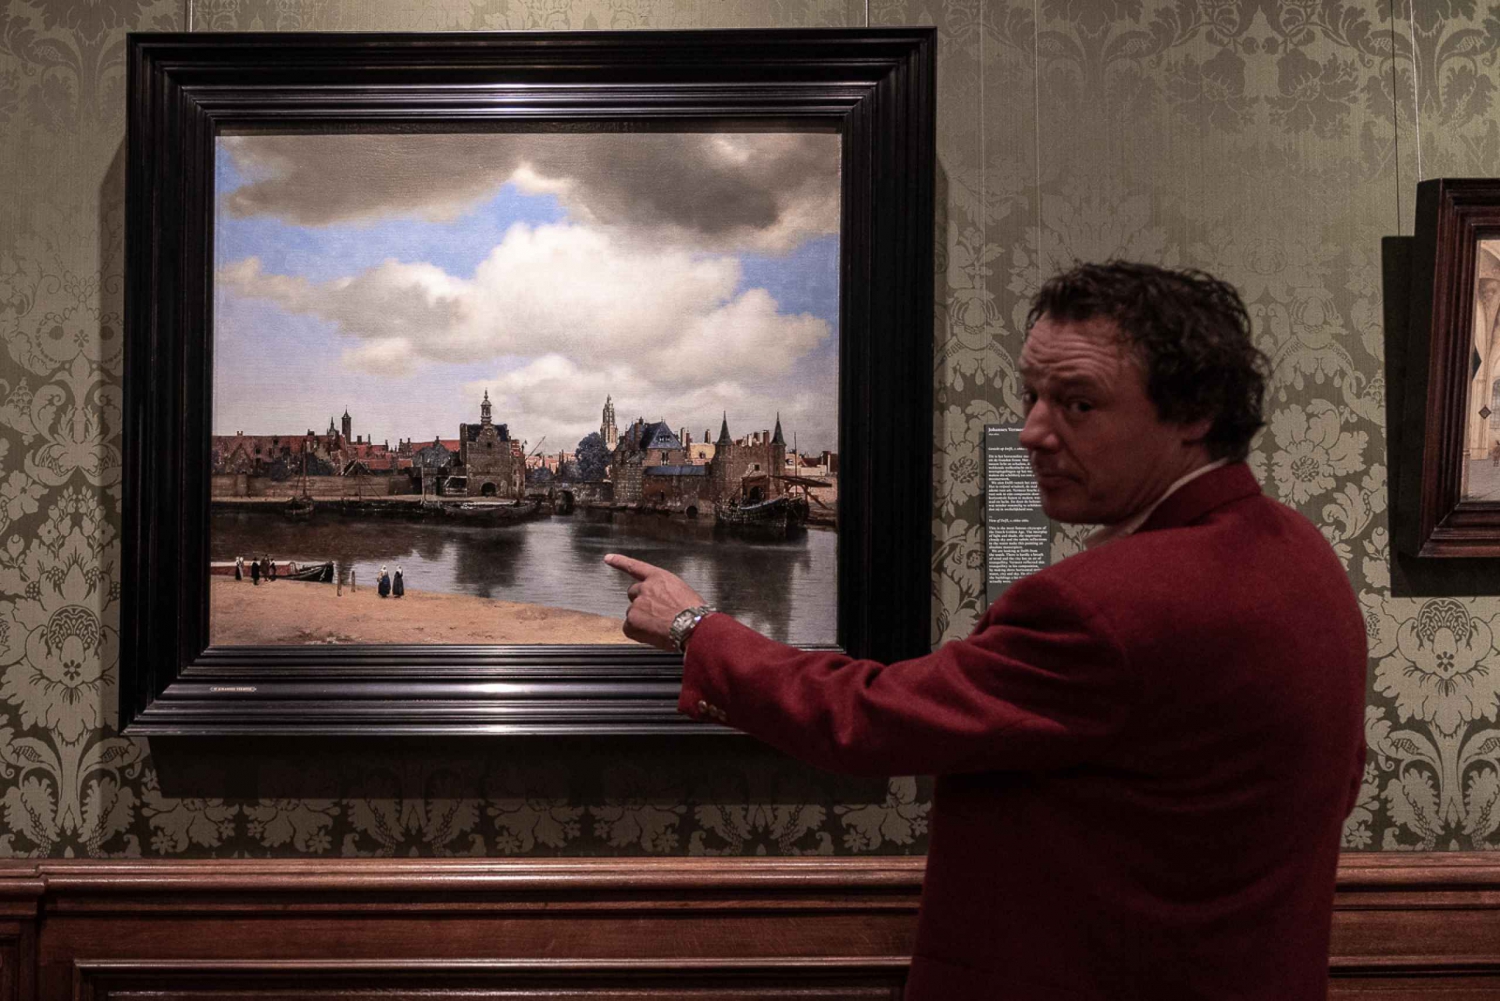 The Hague and the Mauritshuis Gallery